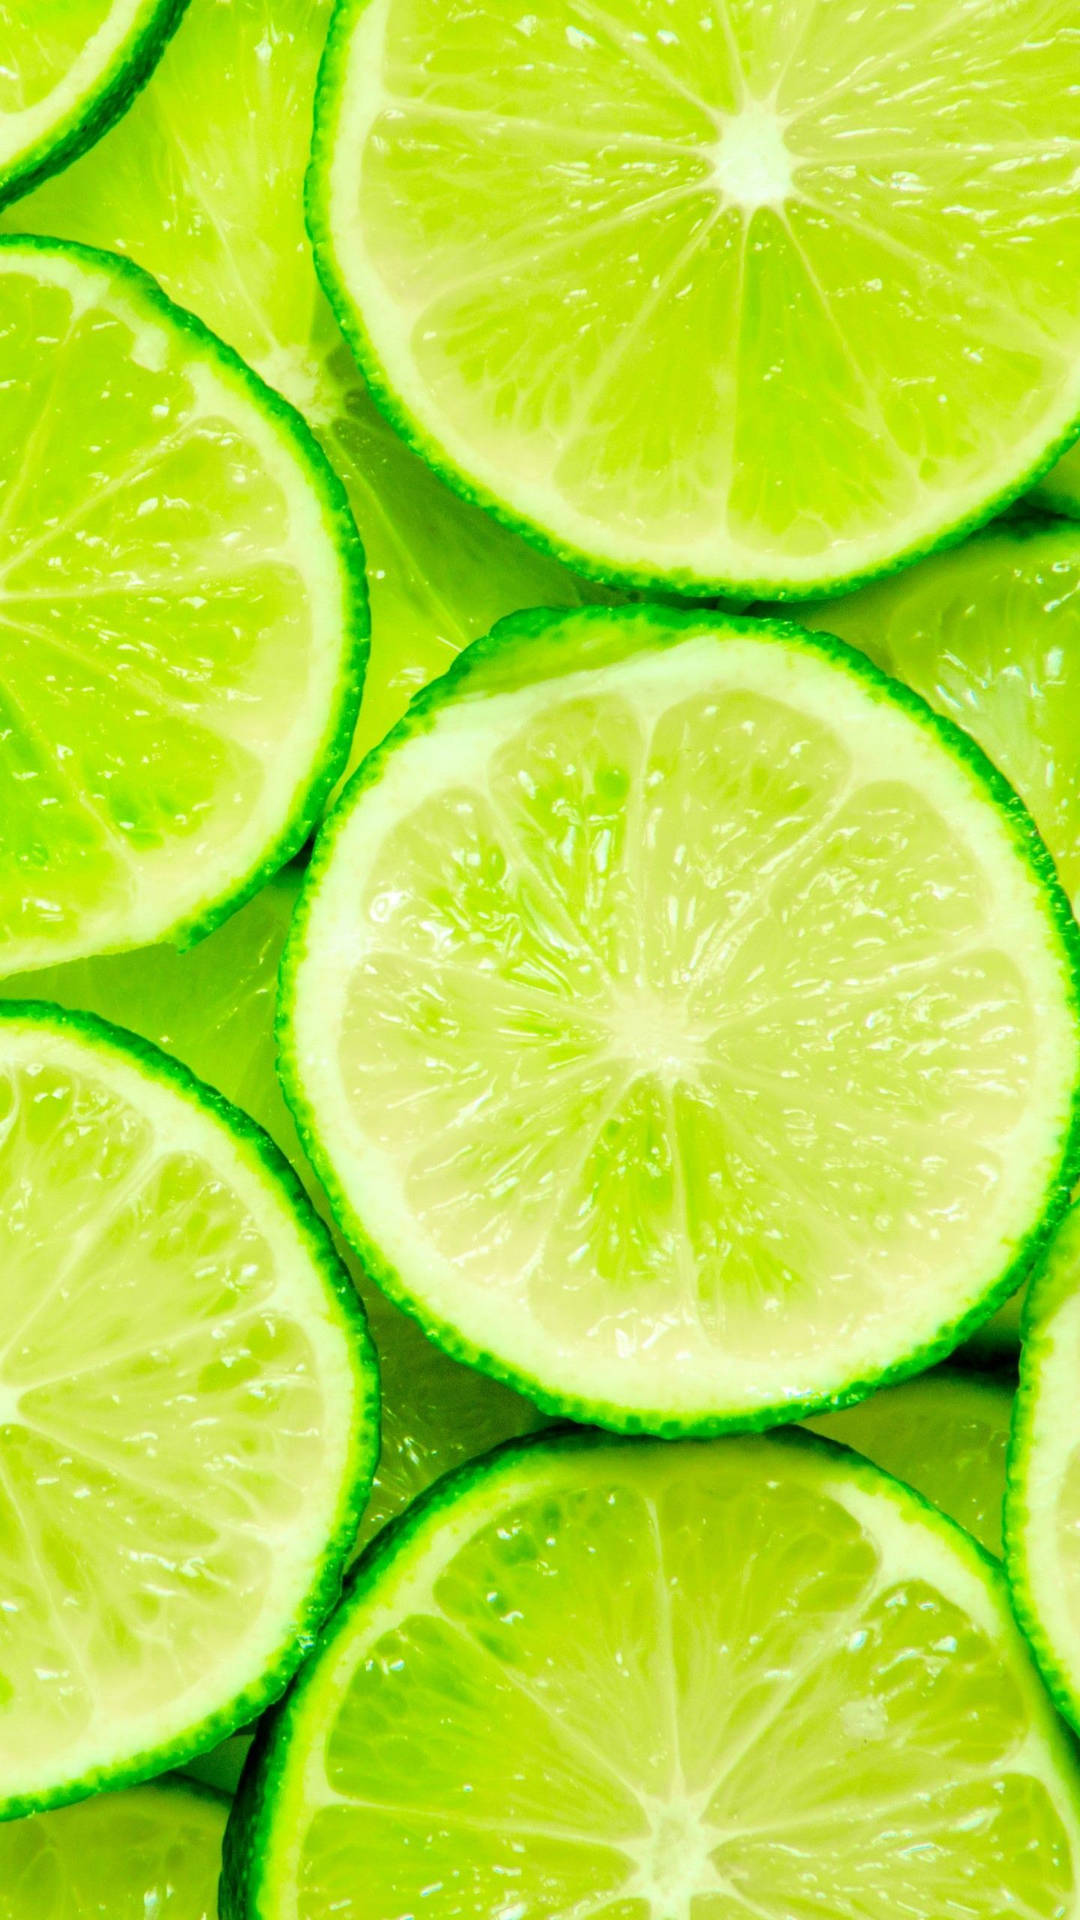 Green Aesthetic Tumblr Lime Slices Background